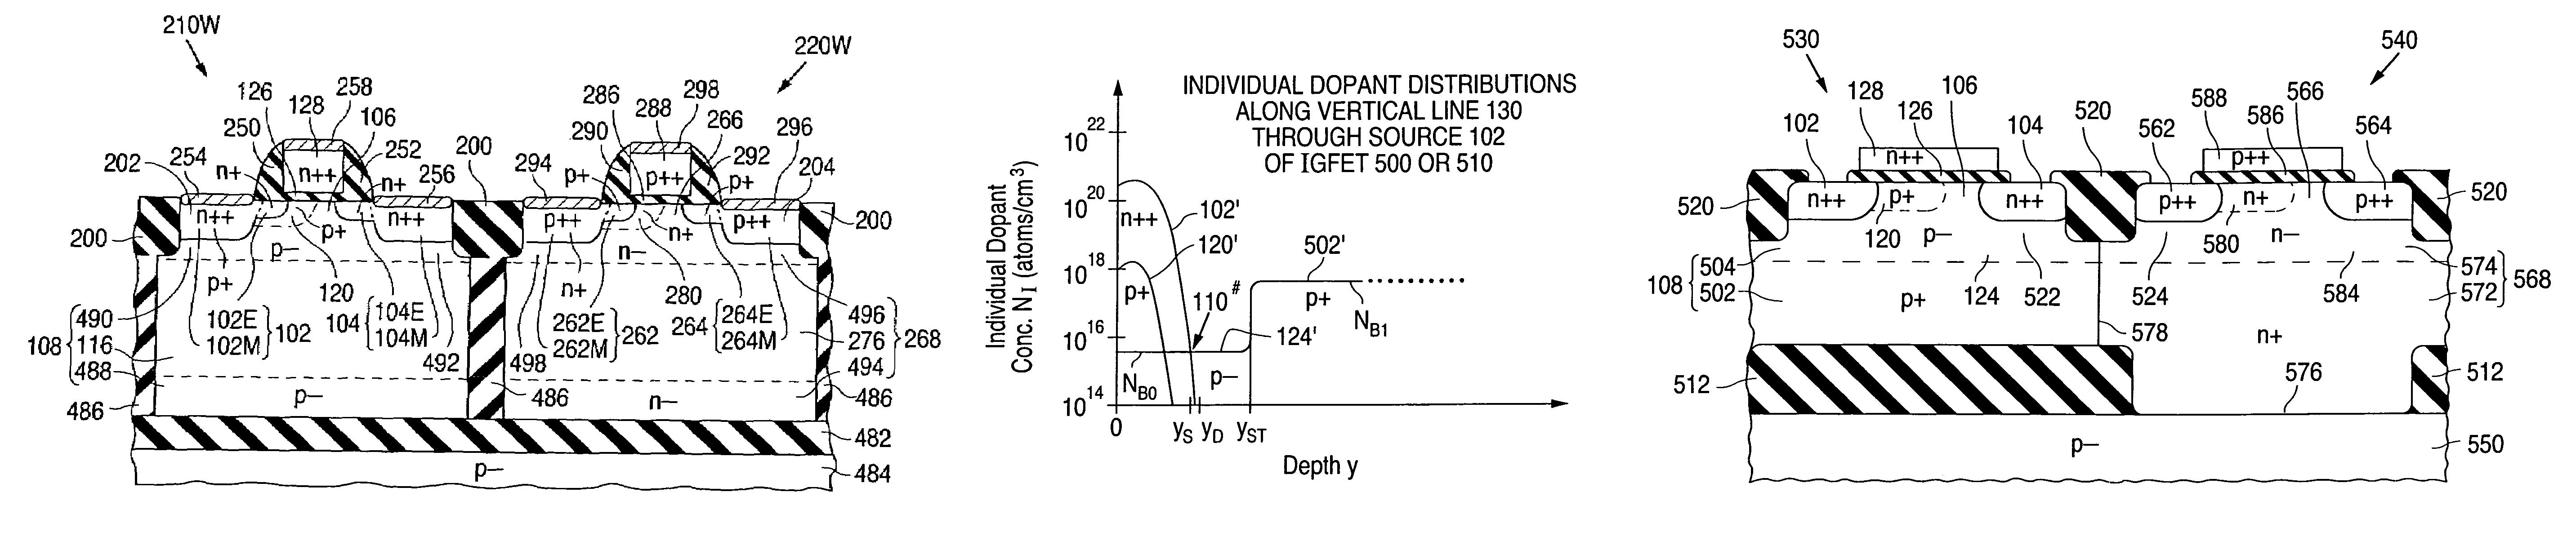 Fabrication of semiconductor structure in which complementary field-effect transistors each have hypoabrupt body dopant distribution below at least one source/drain zone